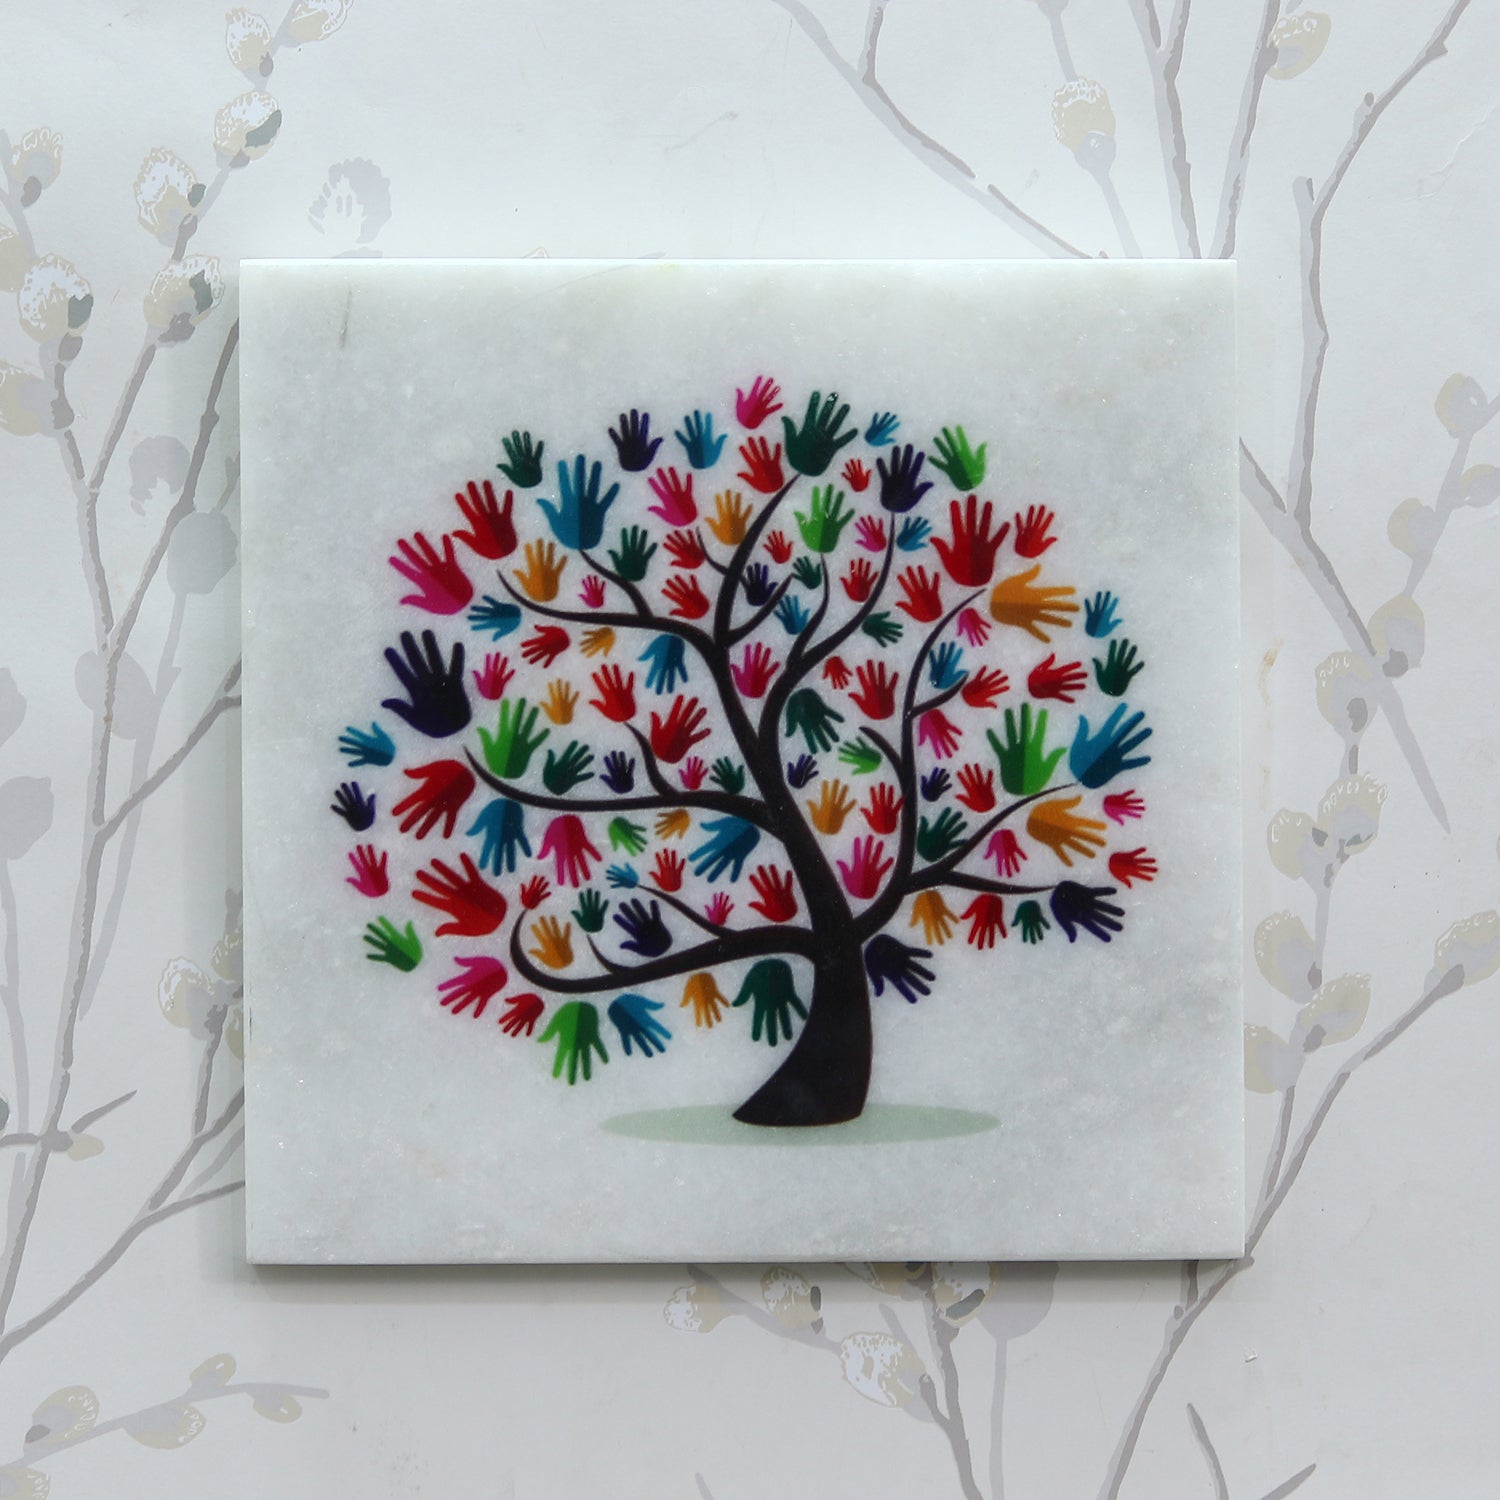 Colorful Hands Tree Painting On Marble Square Tile